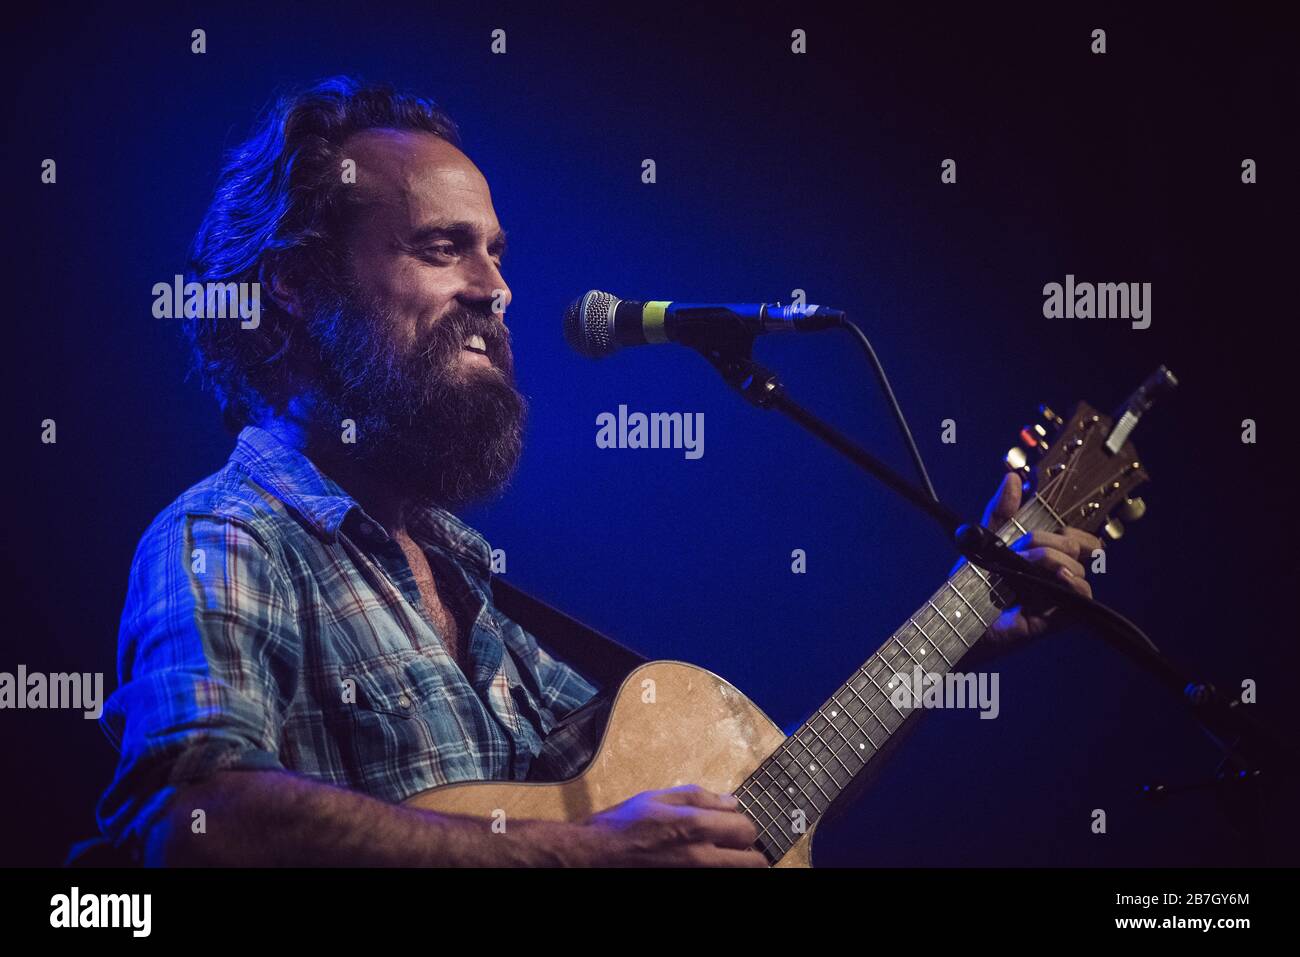 Copenhaegn, Denmark. 11th, November 2014. The American singer, songwriter and folk musician Samuel Beam goes under the recording name Iron & Wine and here performs a live concert at VEGA in Copenhagen. (Photo credit: Gonzales Photo - Rod Clemen). Stock Photo